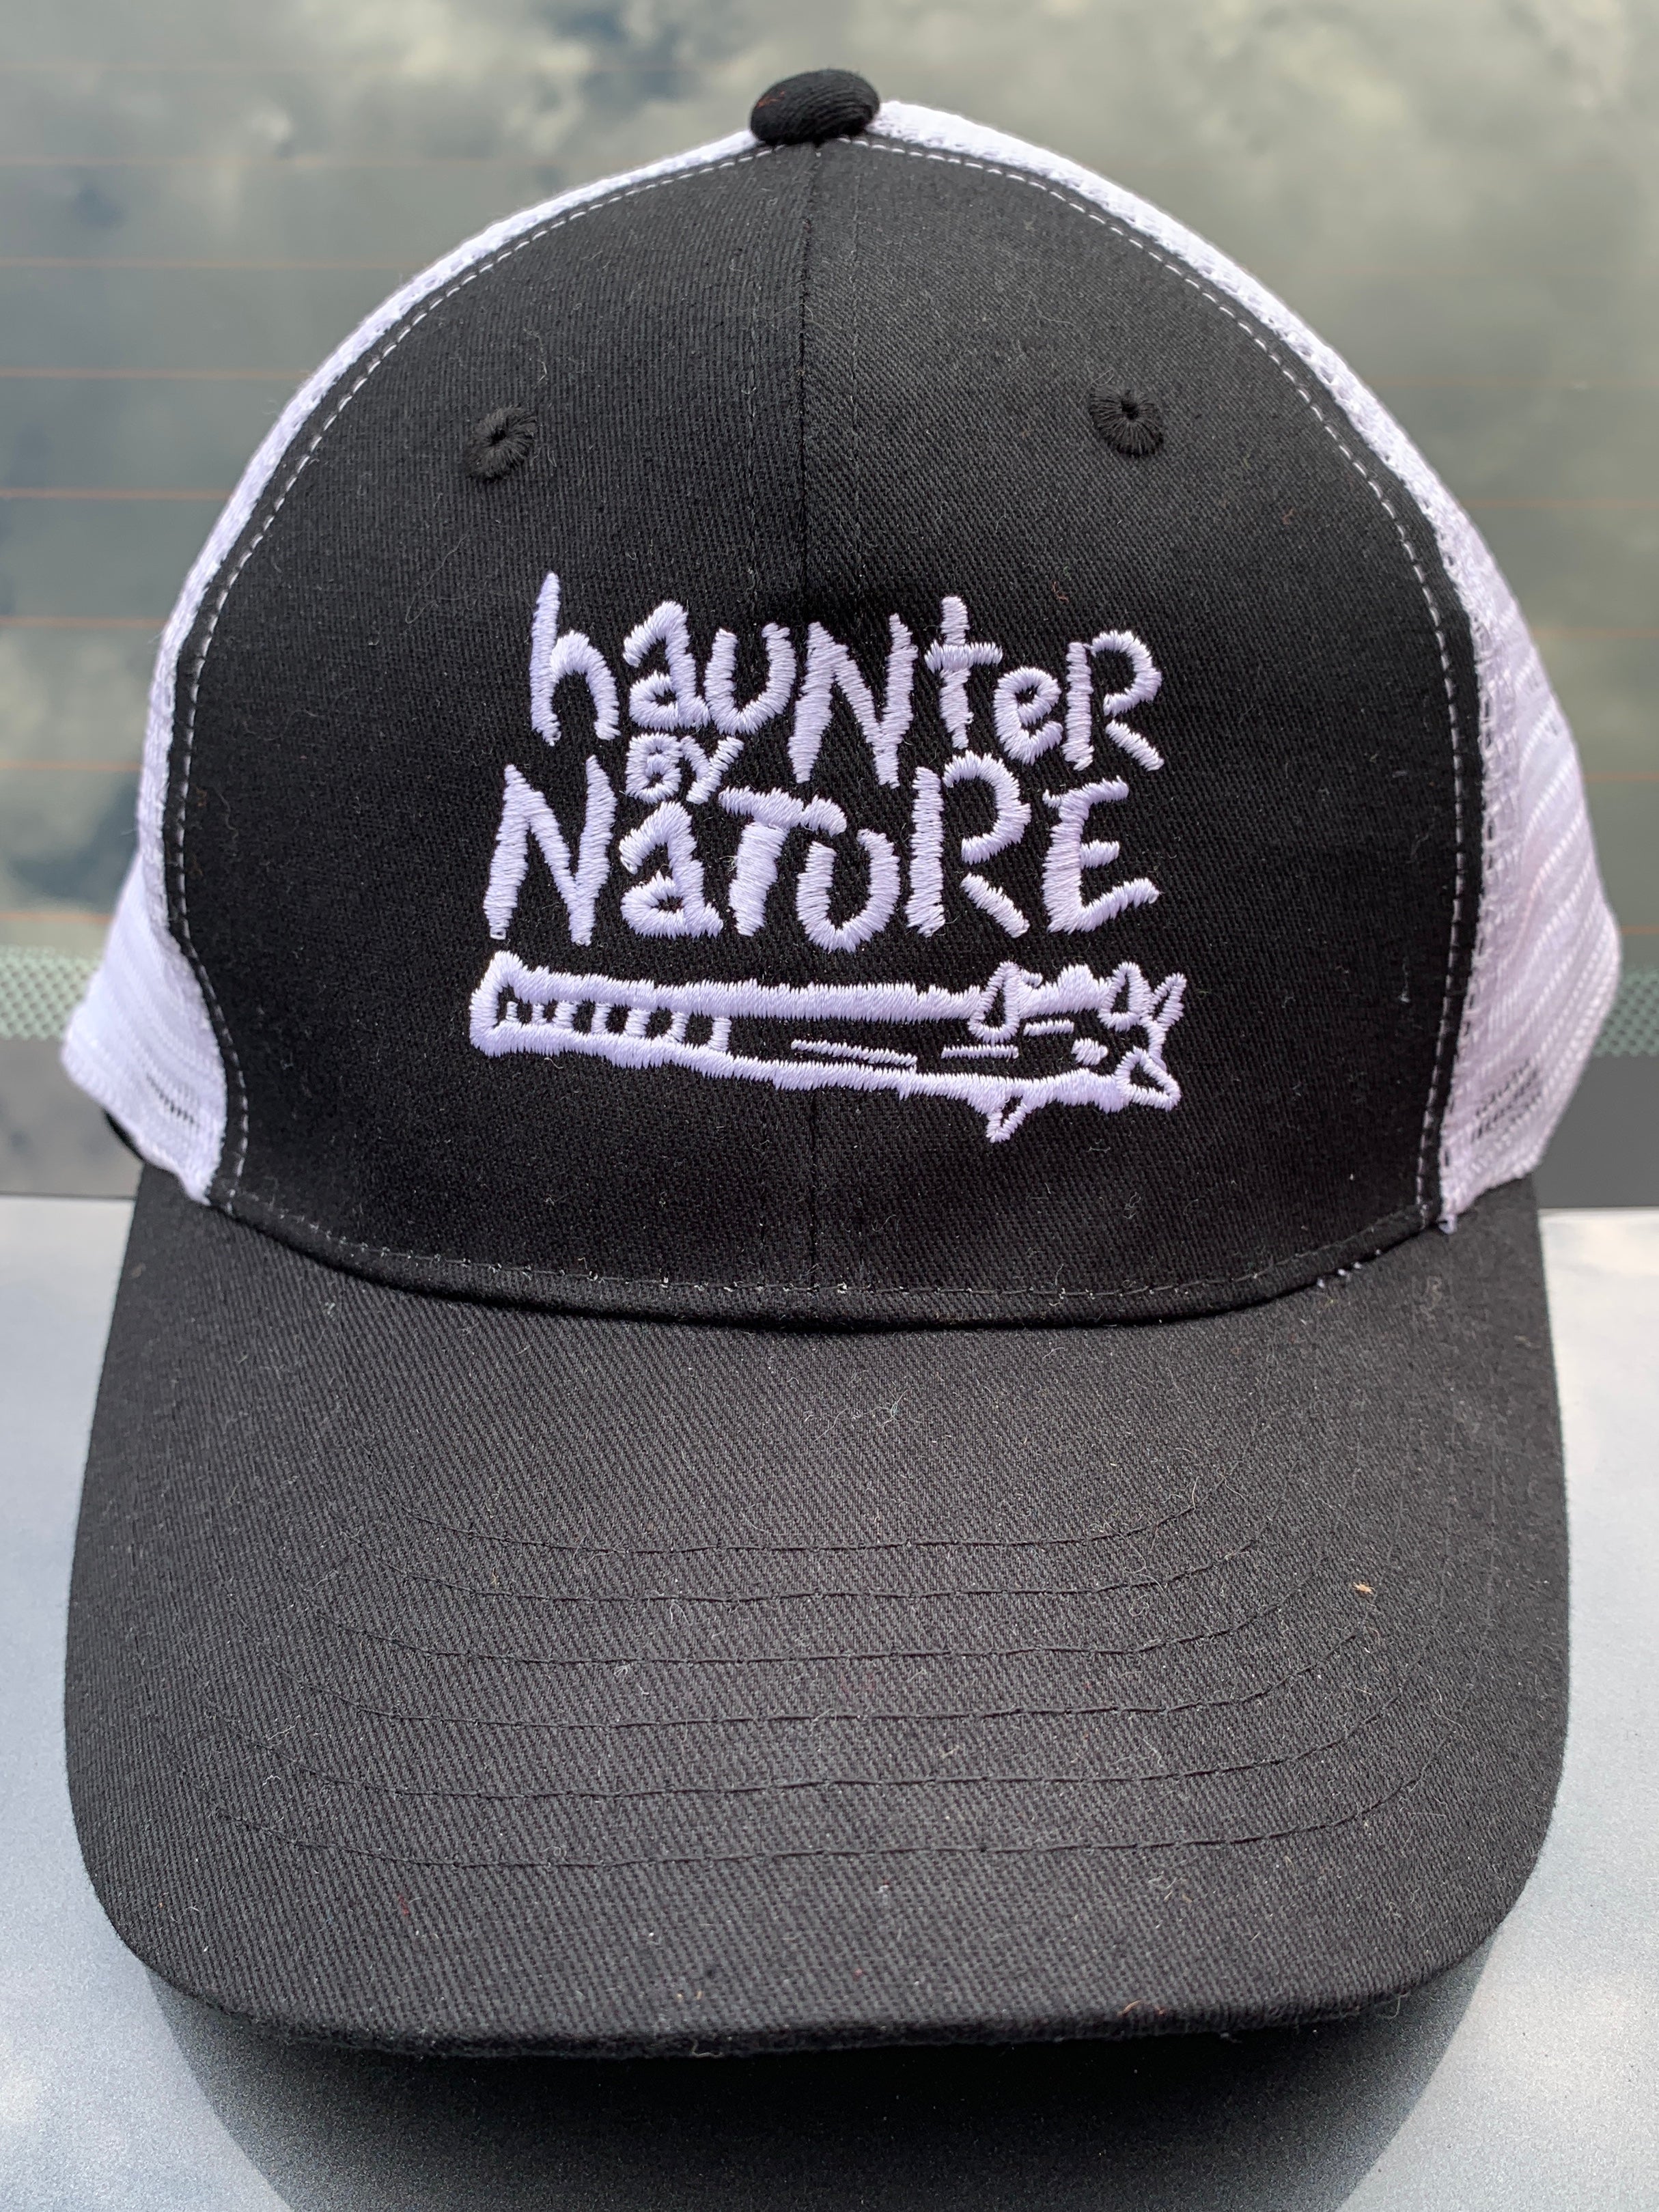 By Nature Hat - Haunt Shirts